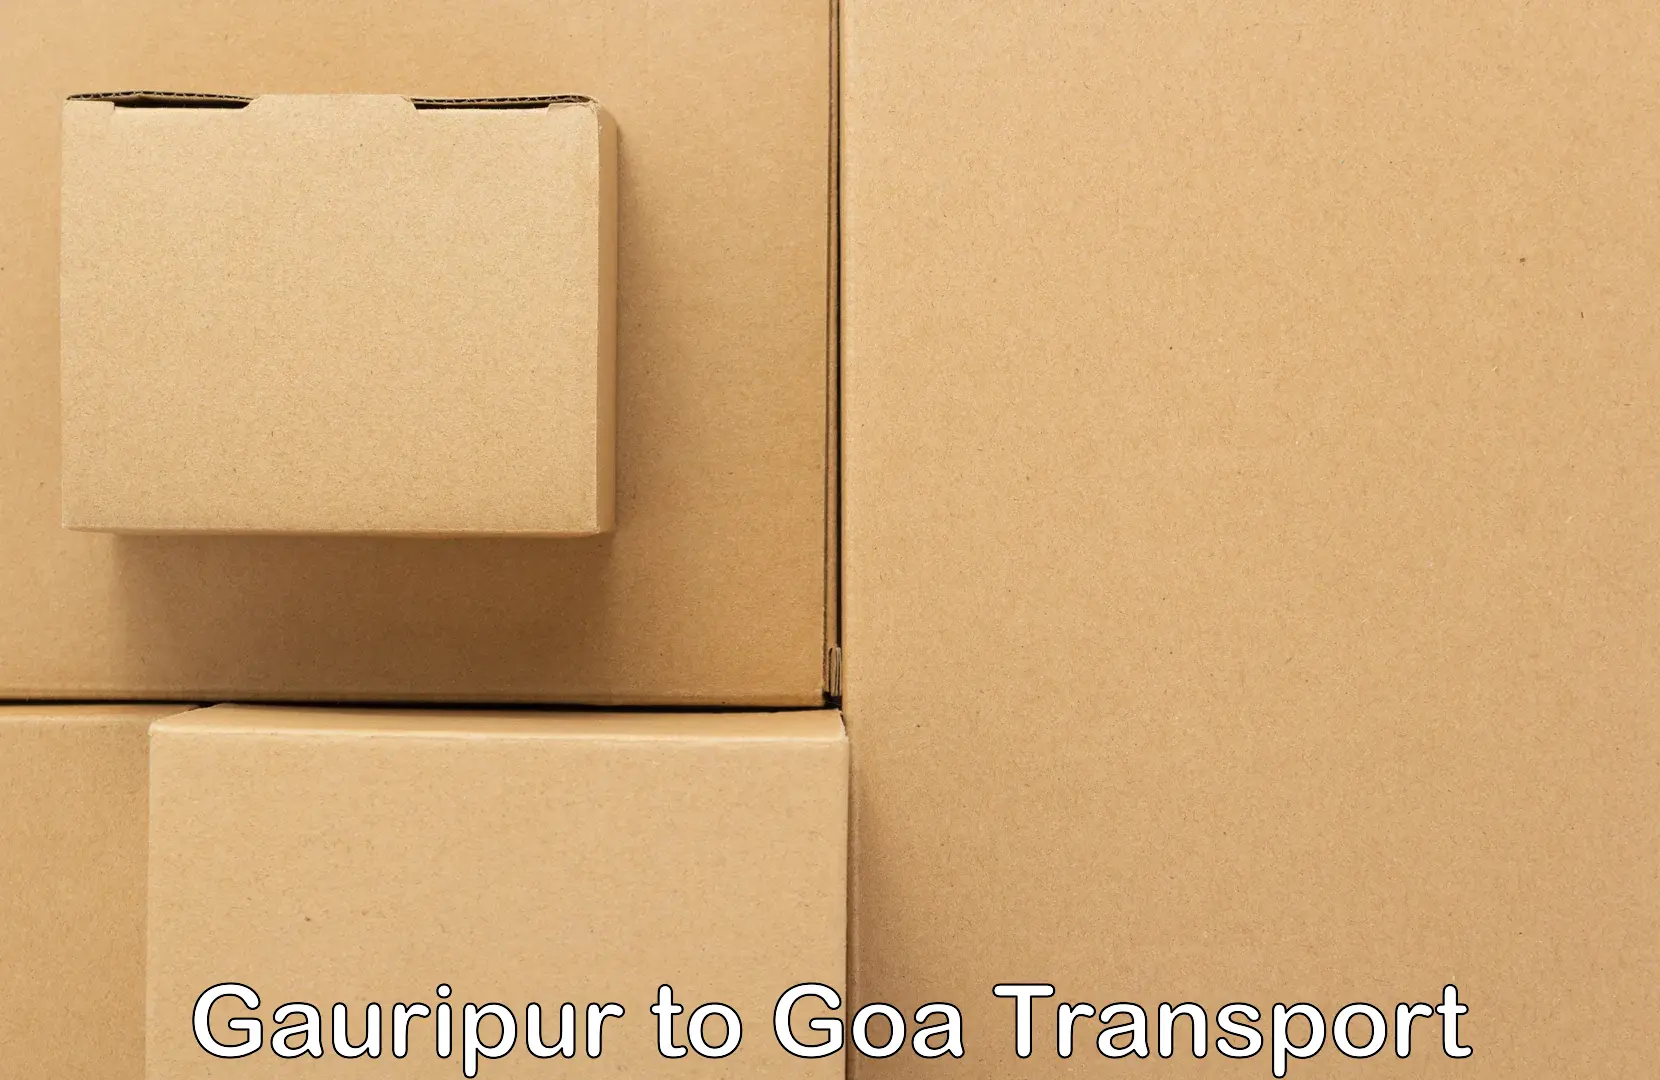 Commercial transport service Gauripur to Bicholim